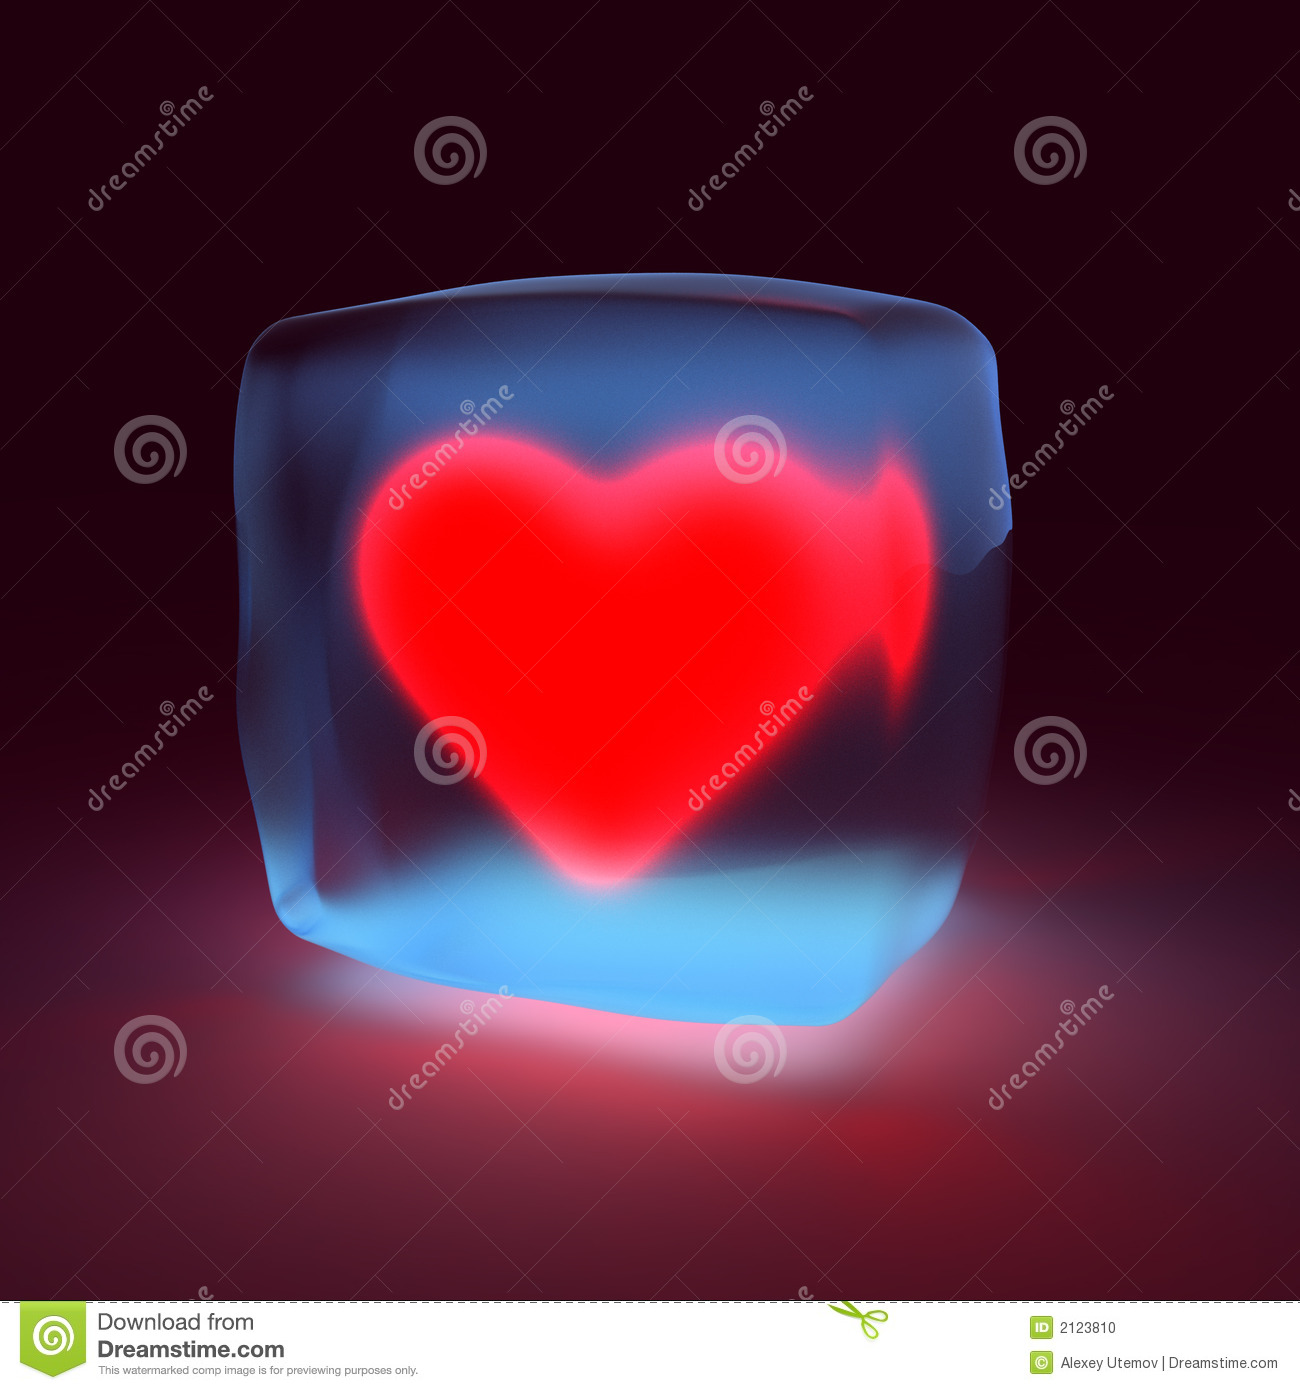 Glowing Heart In Piece Of Ice Stock Photo   Image  2123810